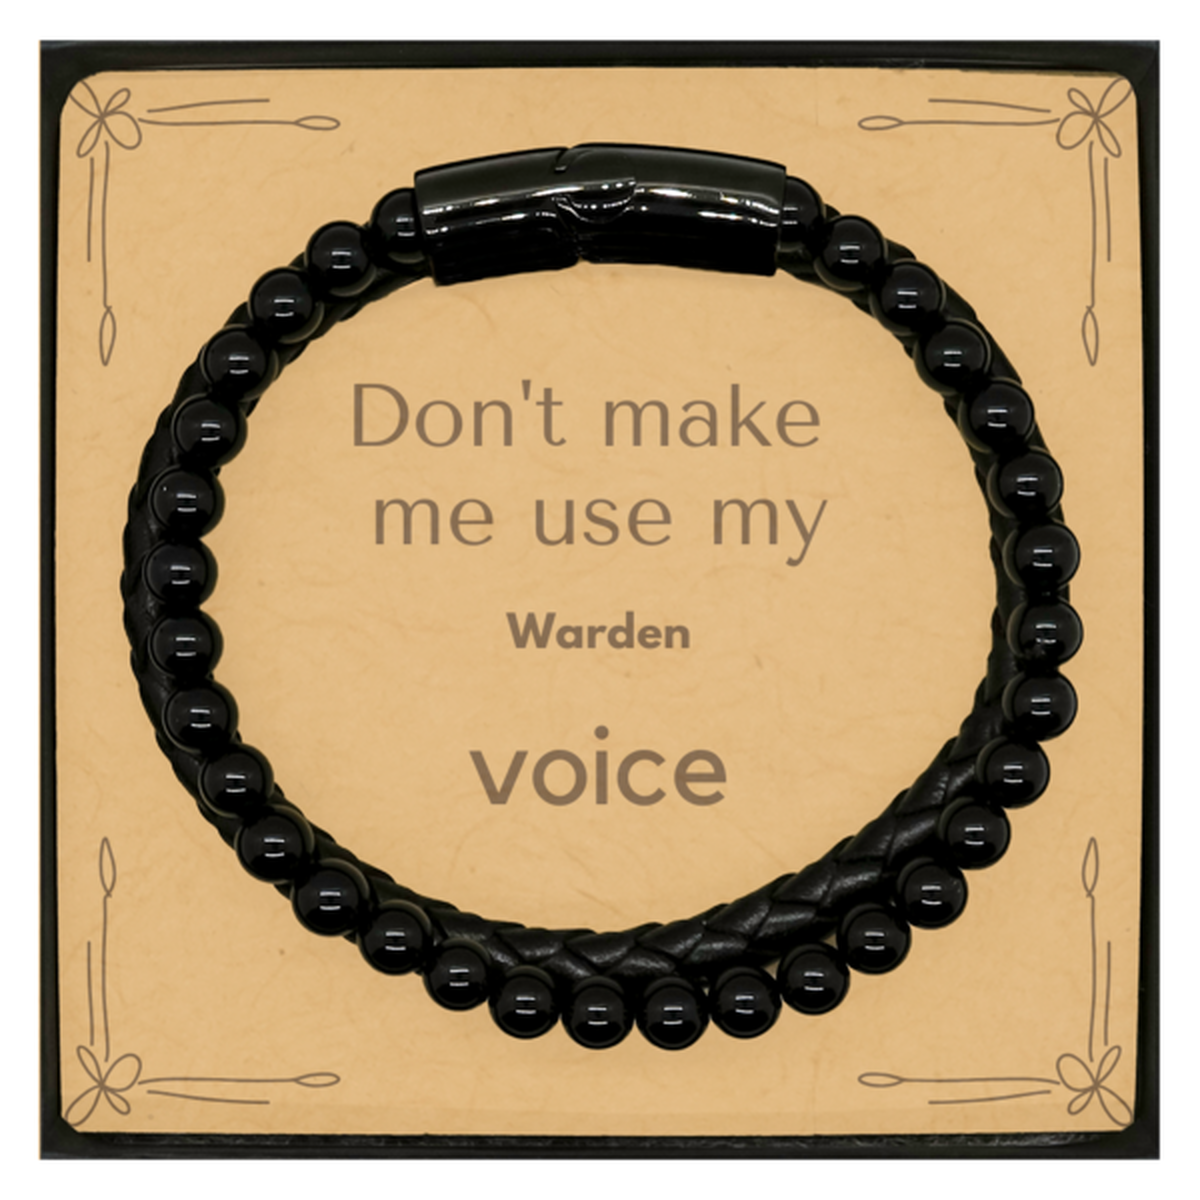 Don't make me use my Warden voice, Sarcasm Warden Card Gifts, Christmas Warden Stone Leather Bracelets Birthday Unique Gifts For Warden Coworkers, Men, Women, Colleague, Friends